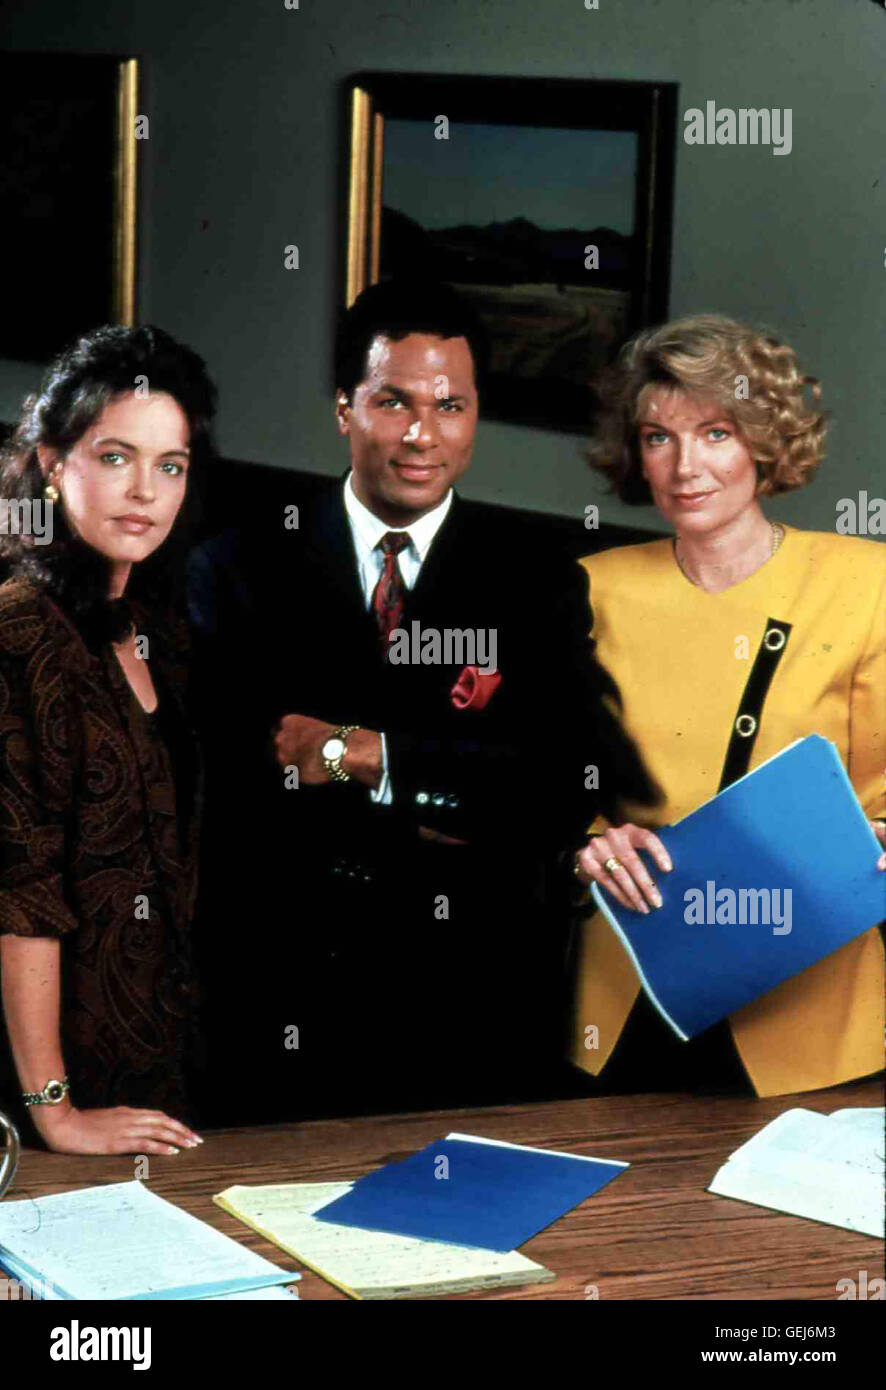 Cassie Woodfield (Mary Page Keller), Chuck Gilmore (Philip Michael Thomas), Twyla Cooper (Susan Sullivan) *** Local Caption *** 1990, Perry Mason: The Case Of The Ruthless Re, Perry Mason Und Die Skrupellose Sensations-Reporterin Stock Photo